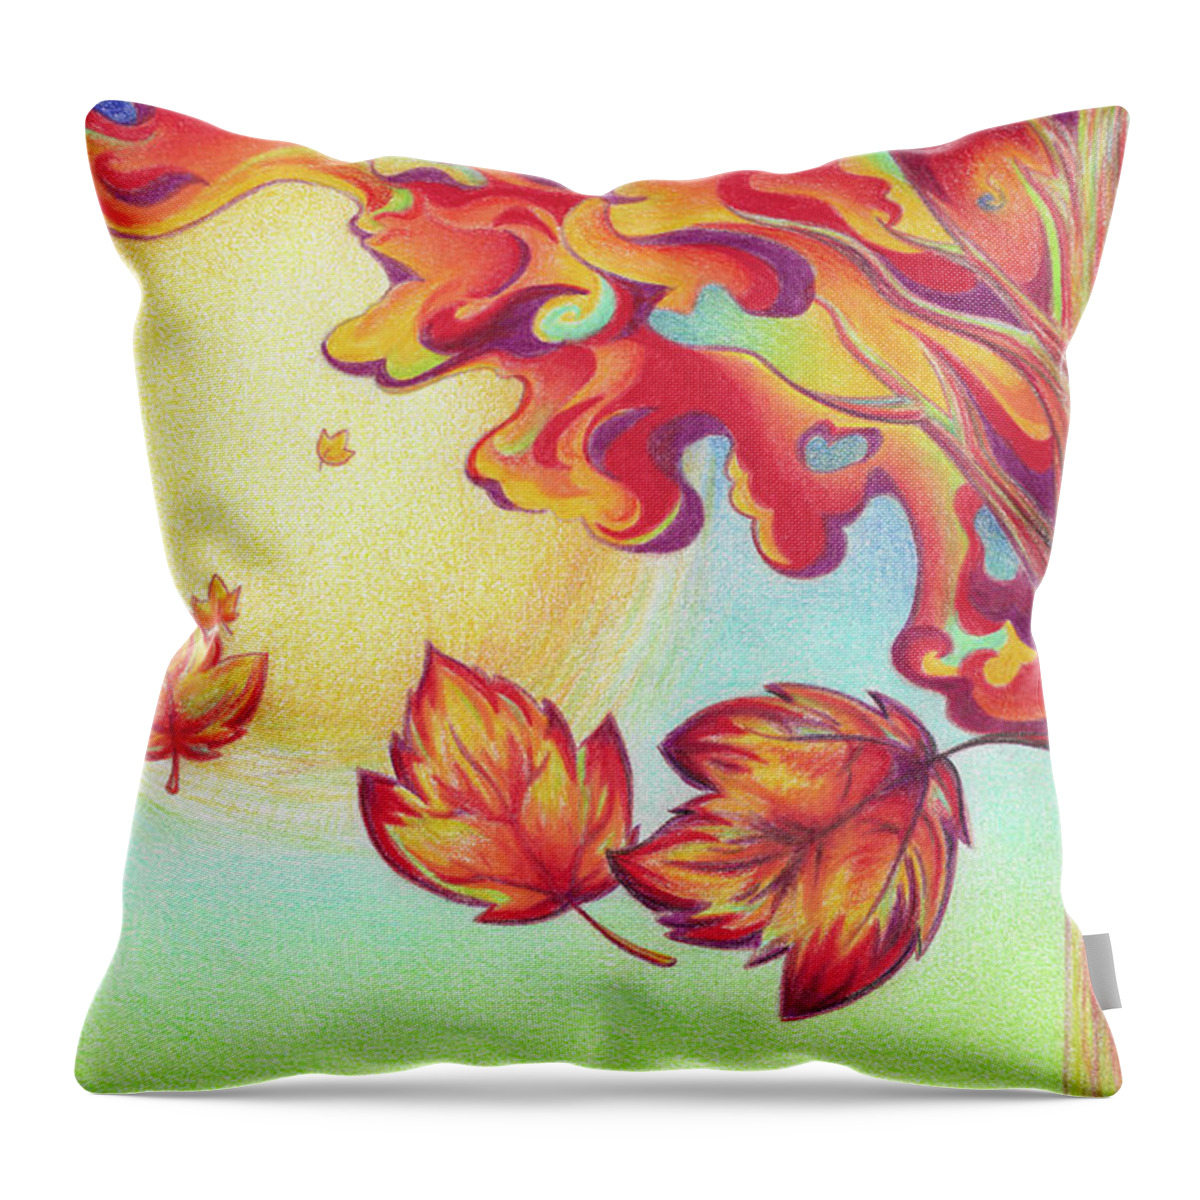 Autumn Throw Pillow featuring the drawing Autumn Wind and Leaves by Sipporah Art and Illustration